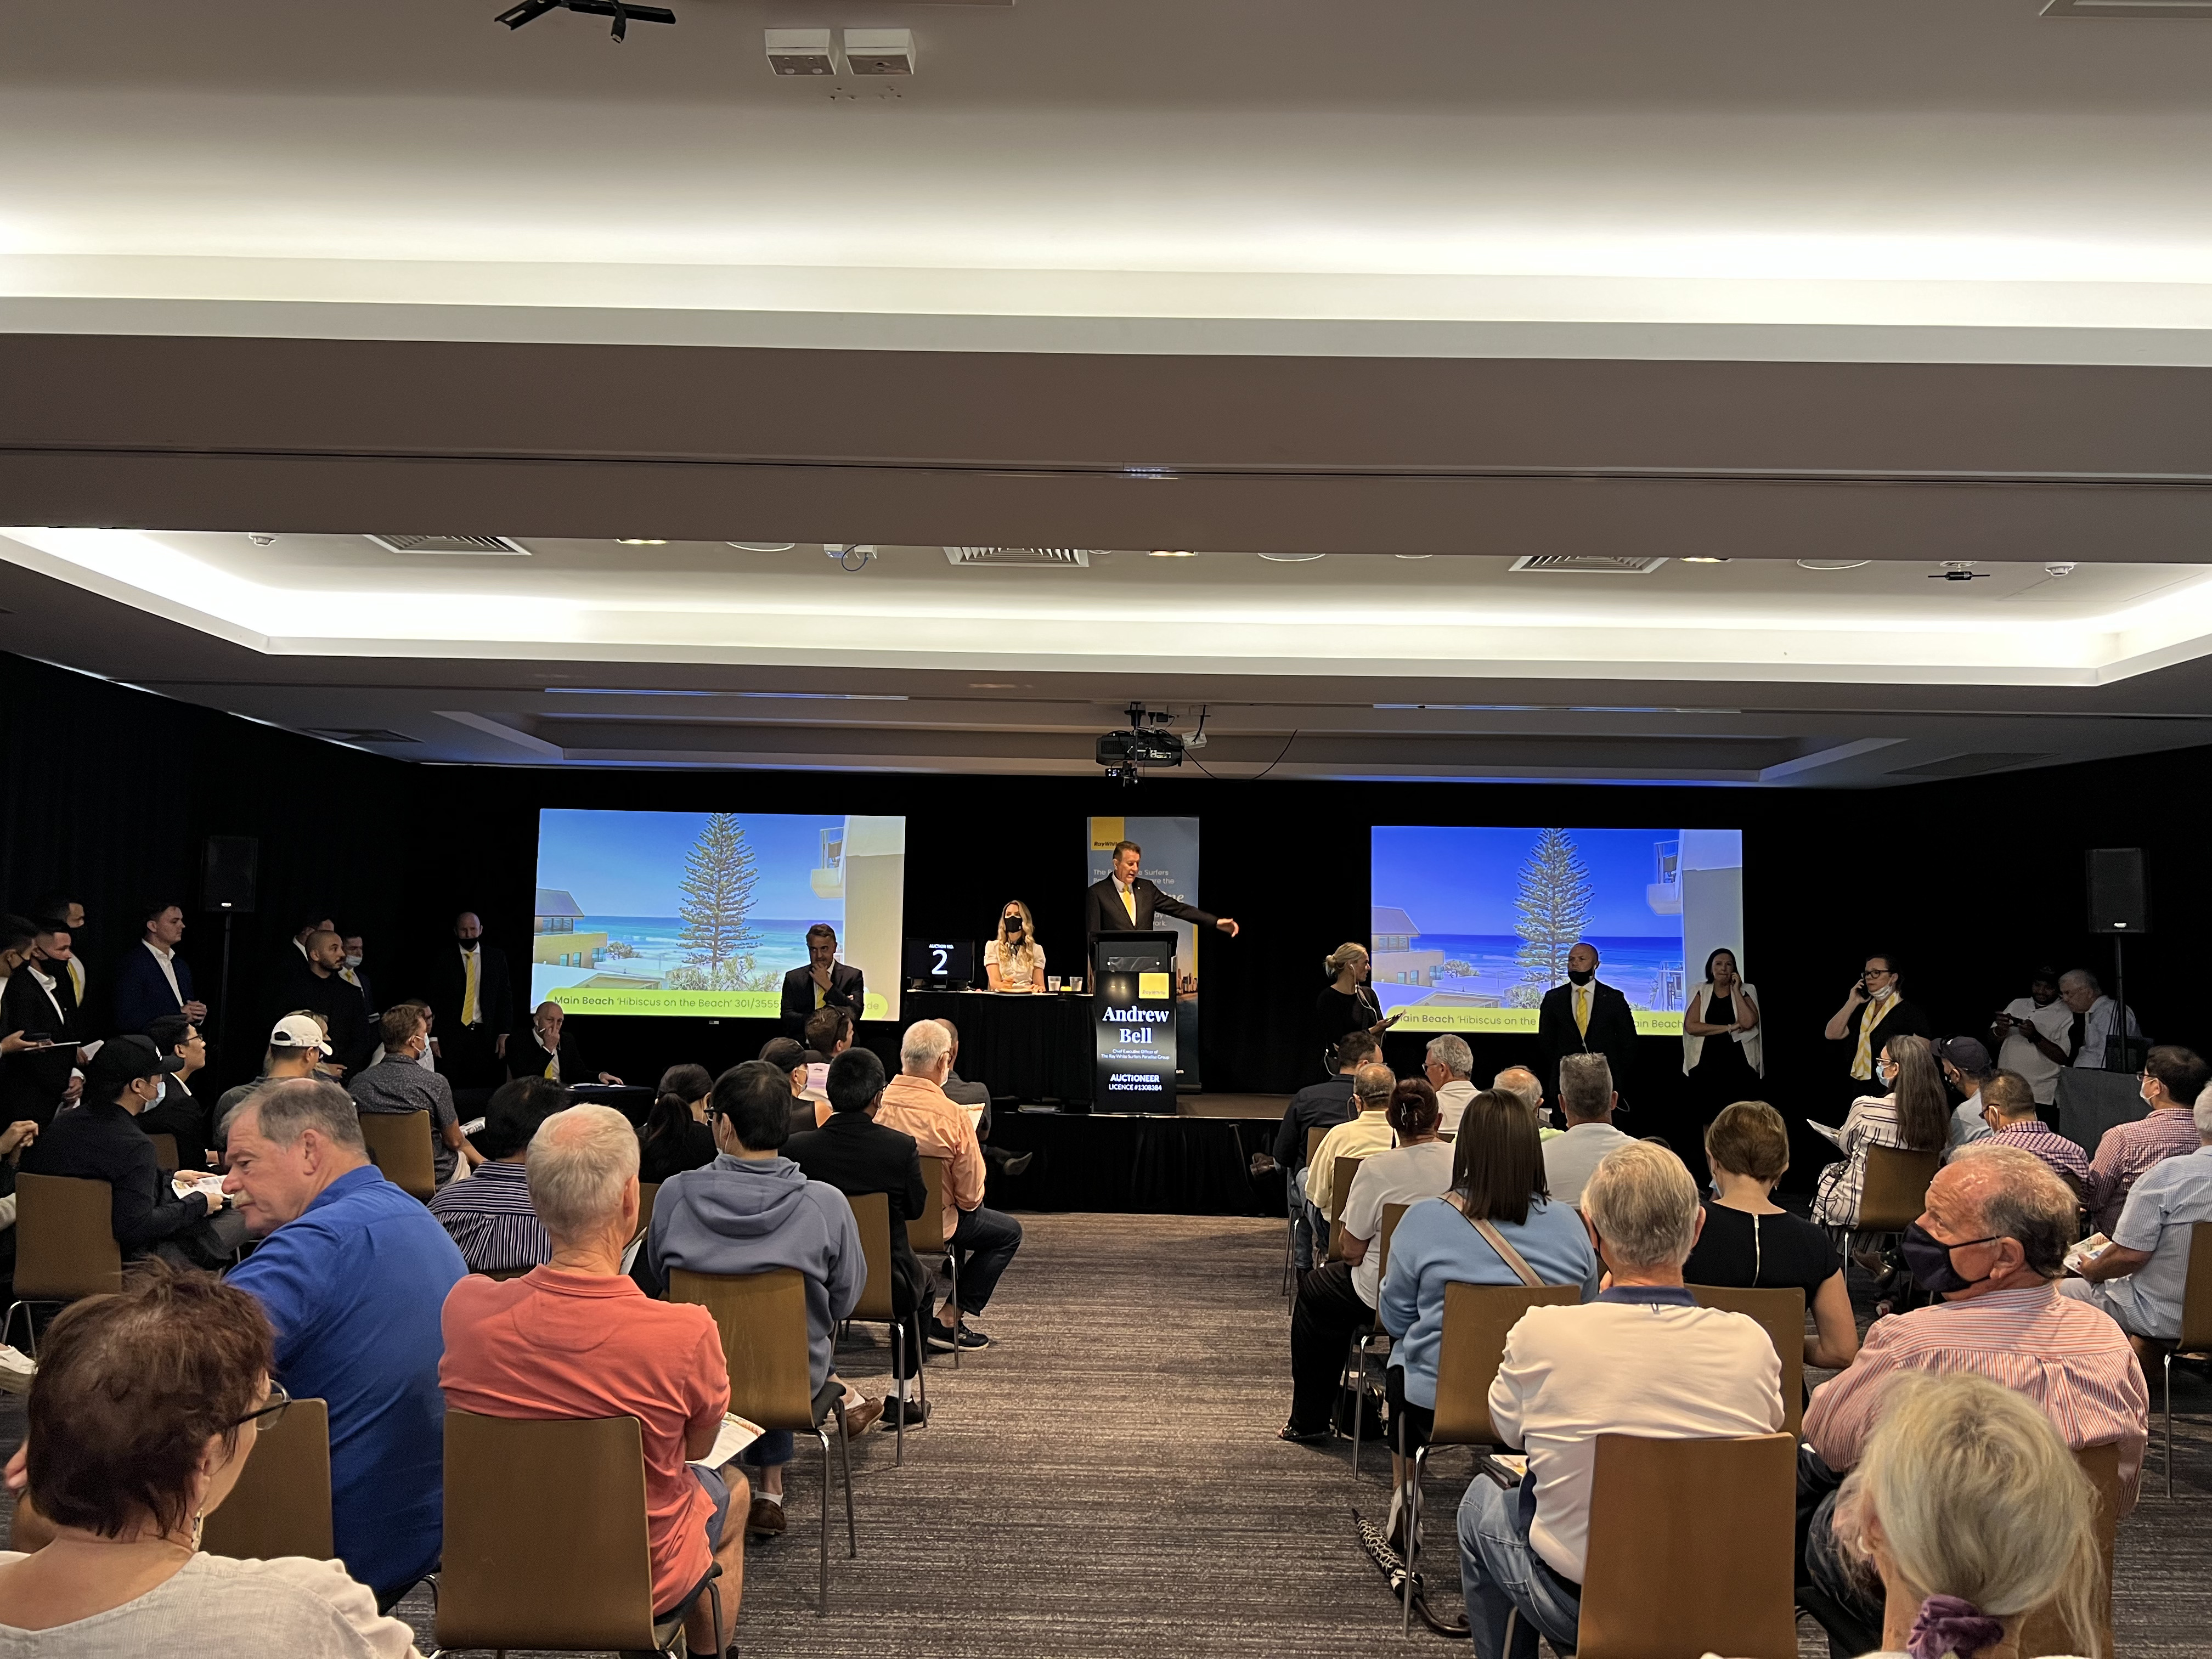 Ray White Surfers Paradise Record 87% Clearance Rate at Auction Event